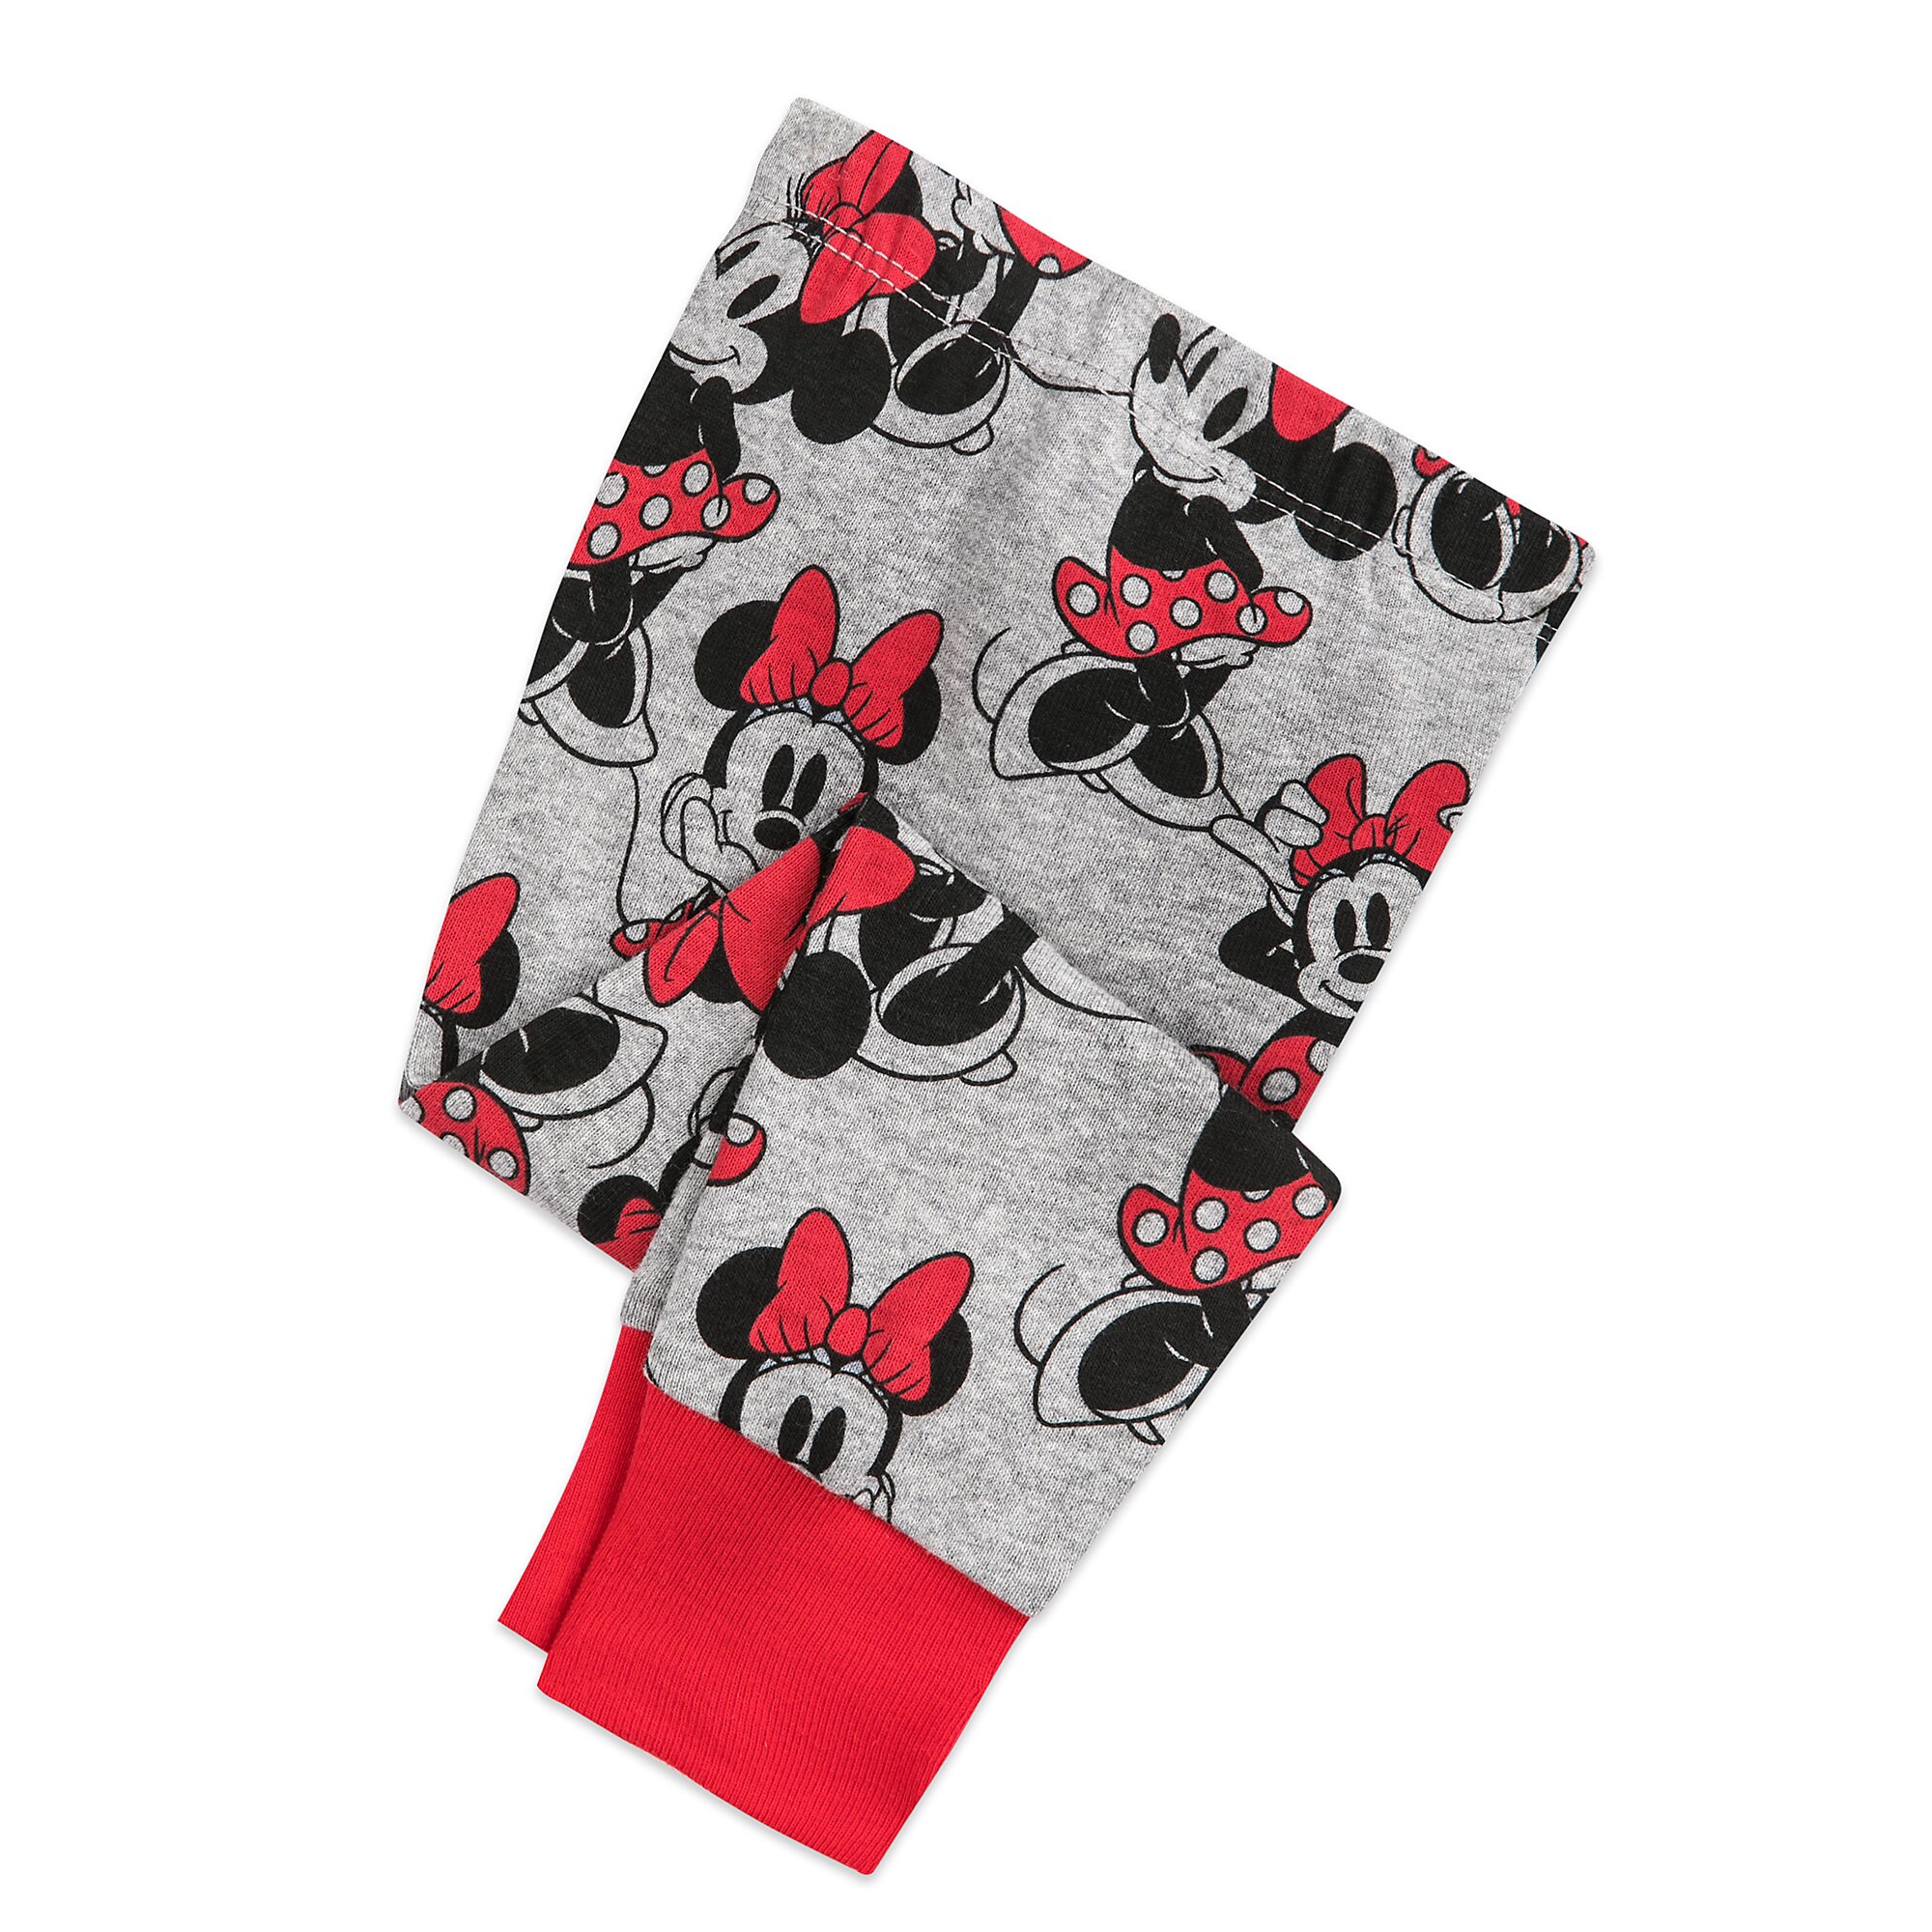 Minnie Mouse PJ PALS Set for Baby